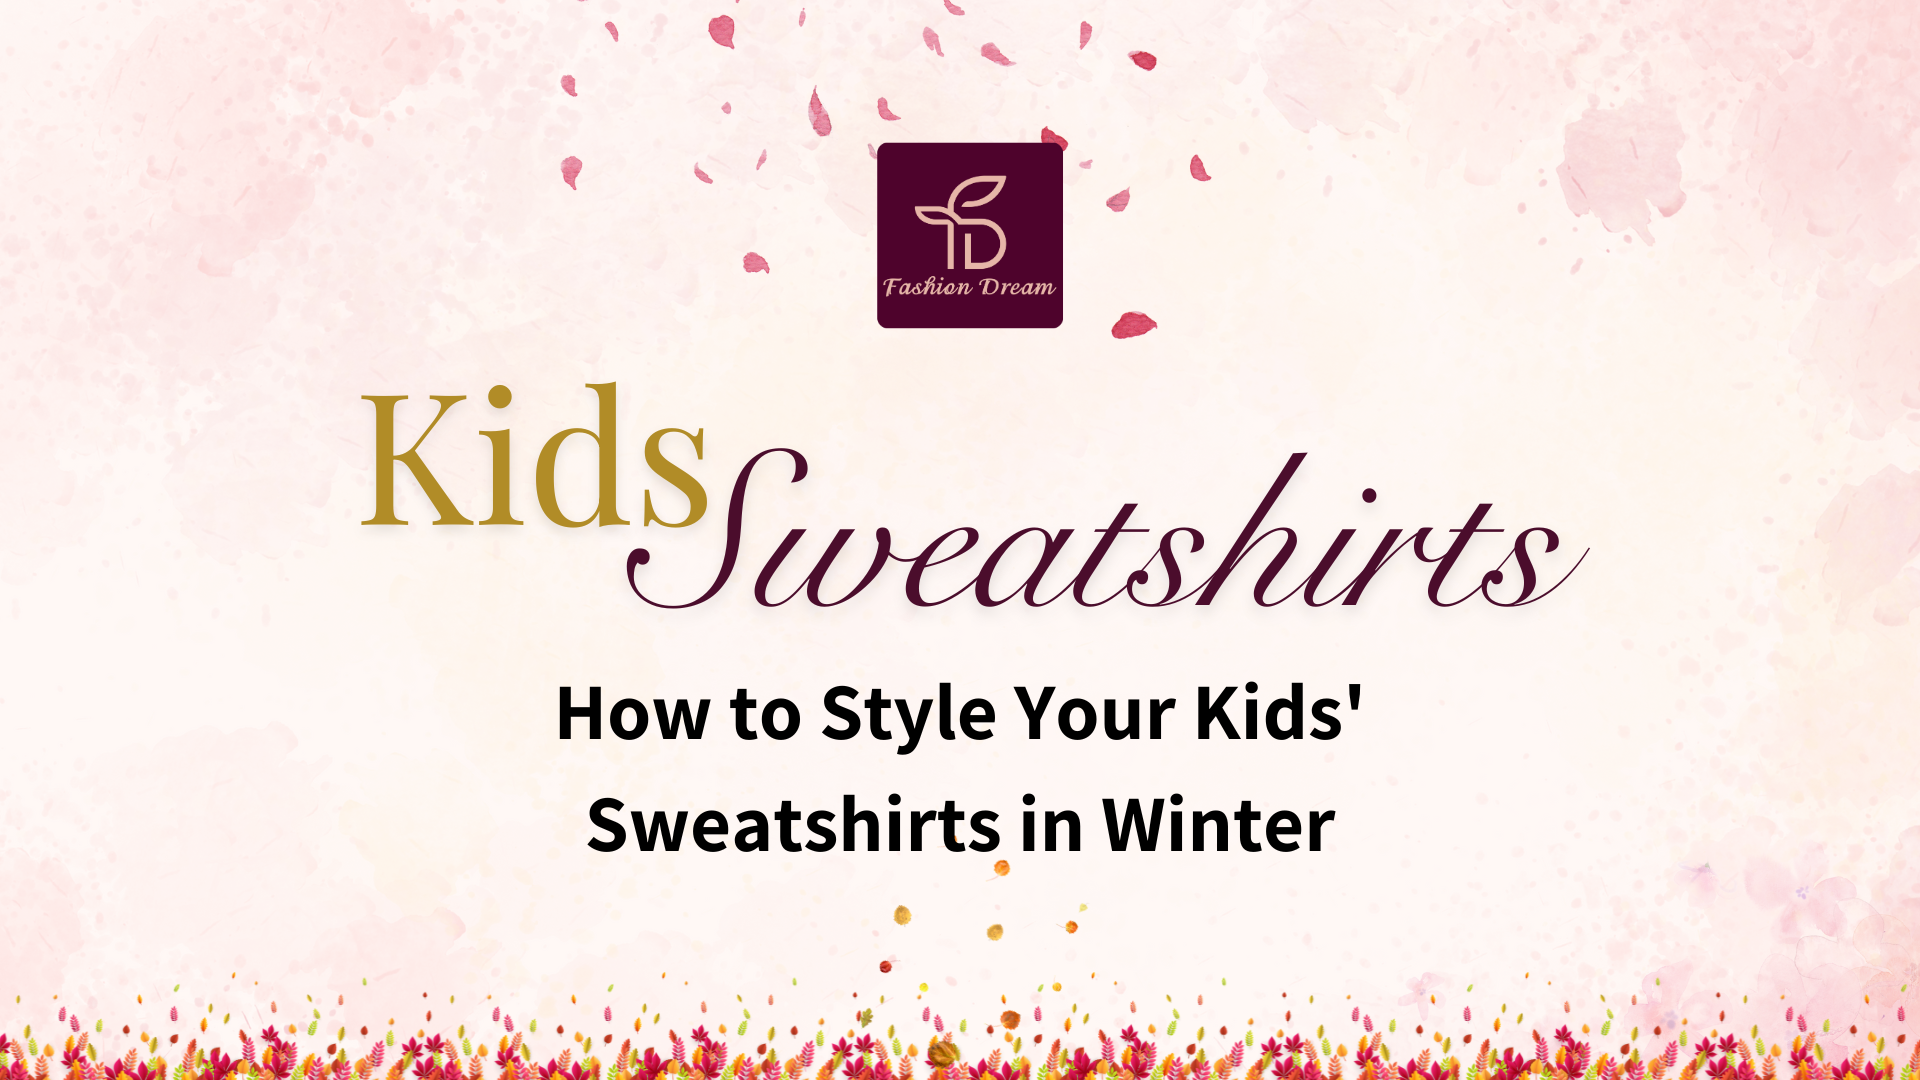 How to Style Your Kids' Sweatshirts in Winter